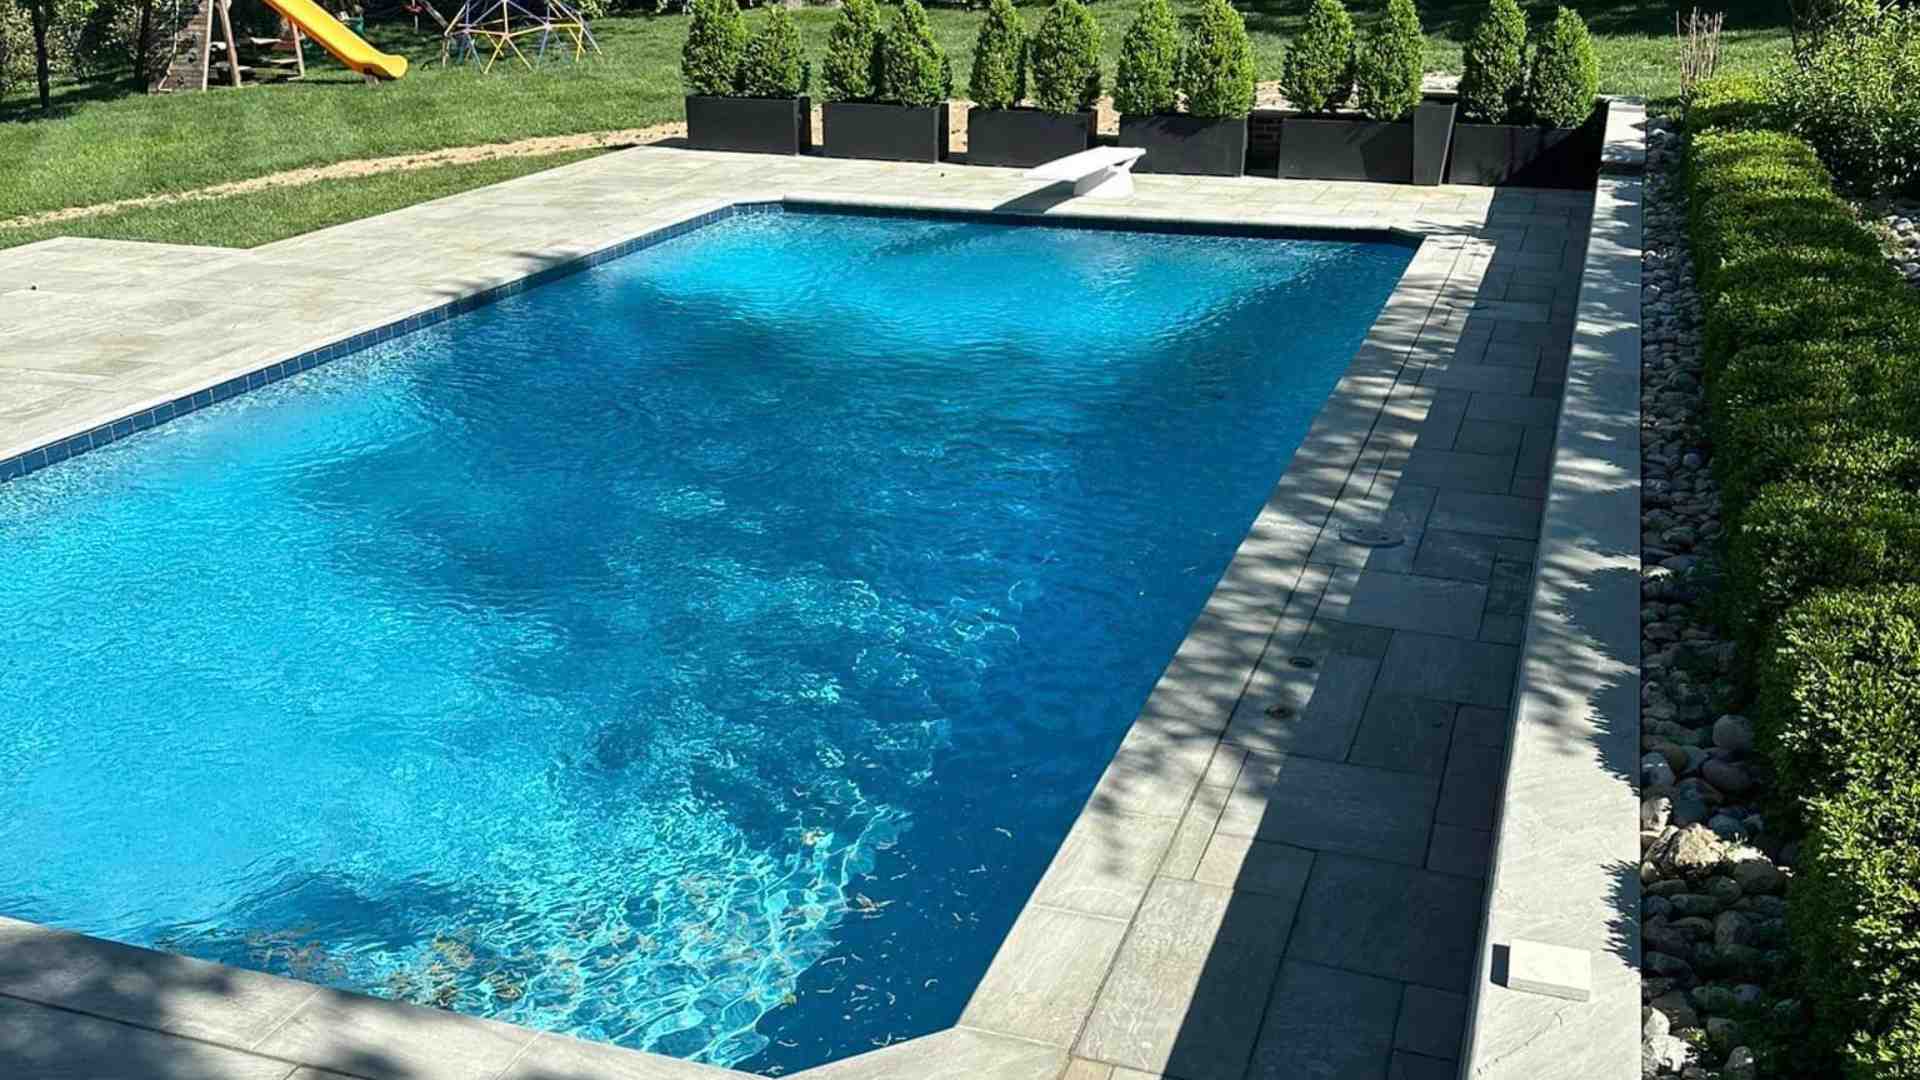 H&H Pool Installation Contractors St. Louis